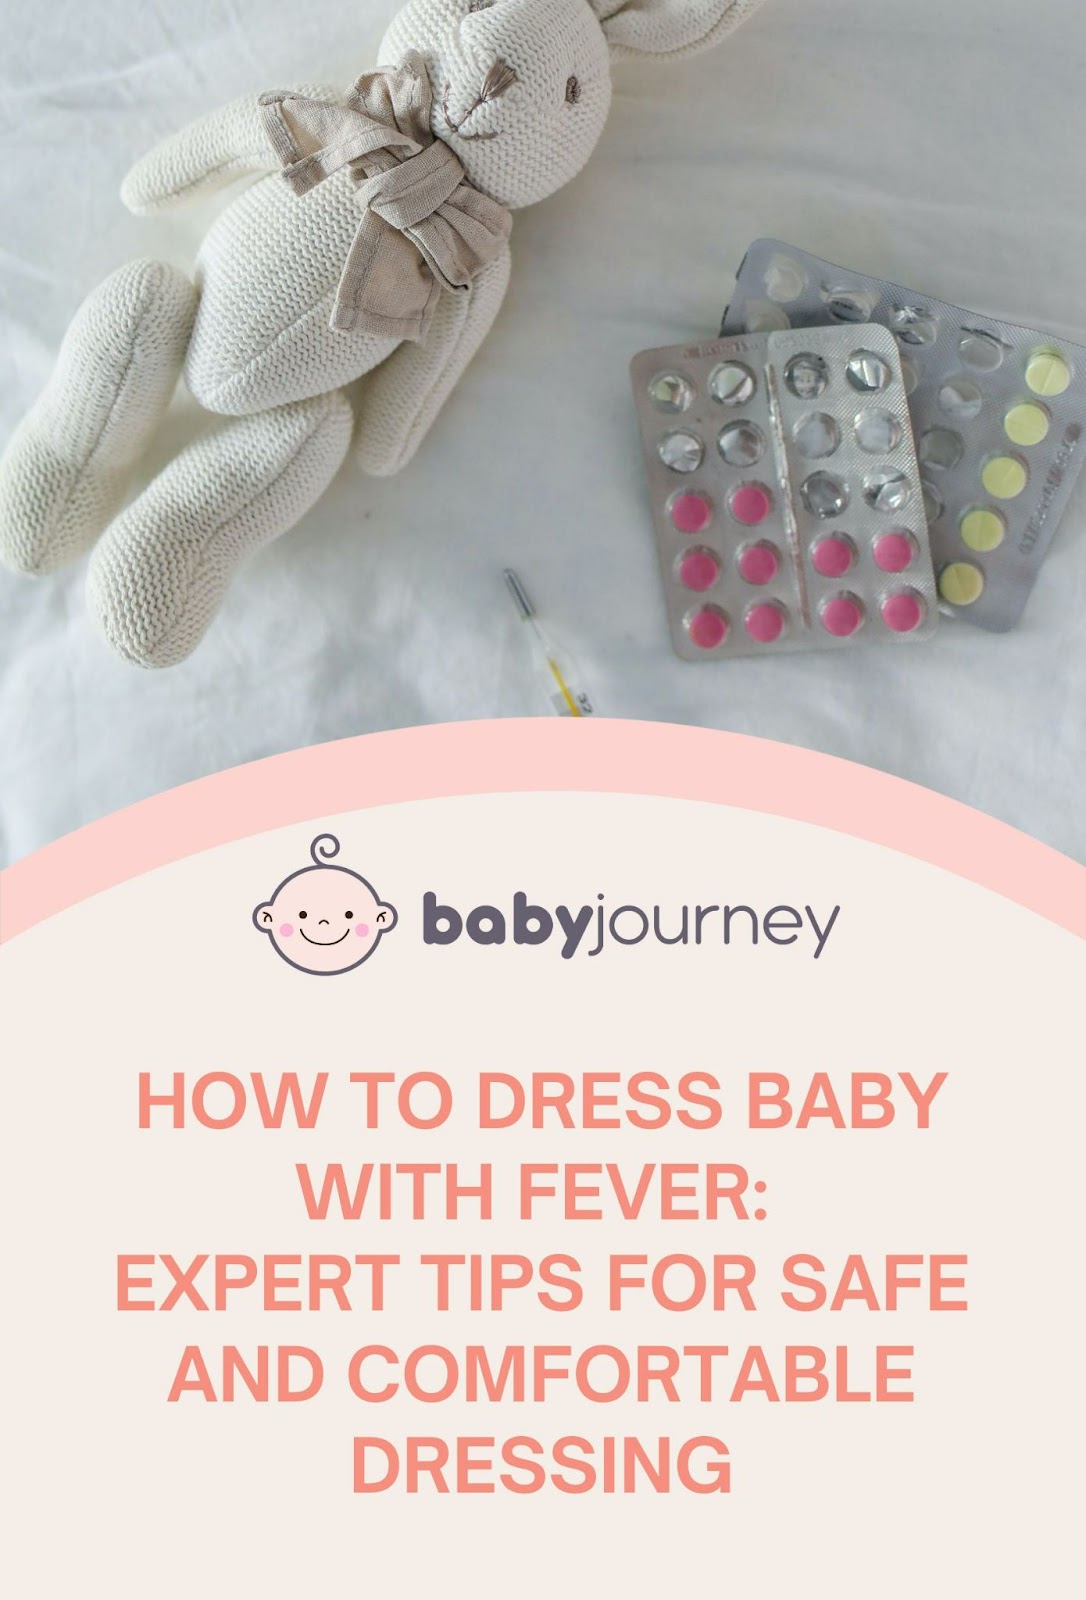 How to Dress Baby with Fever Pinterest - Baby Journey